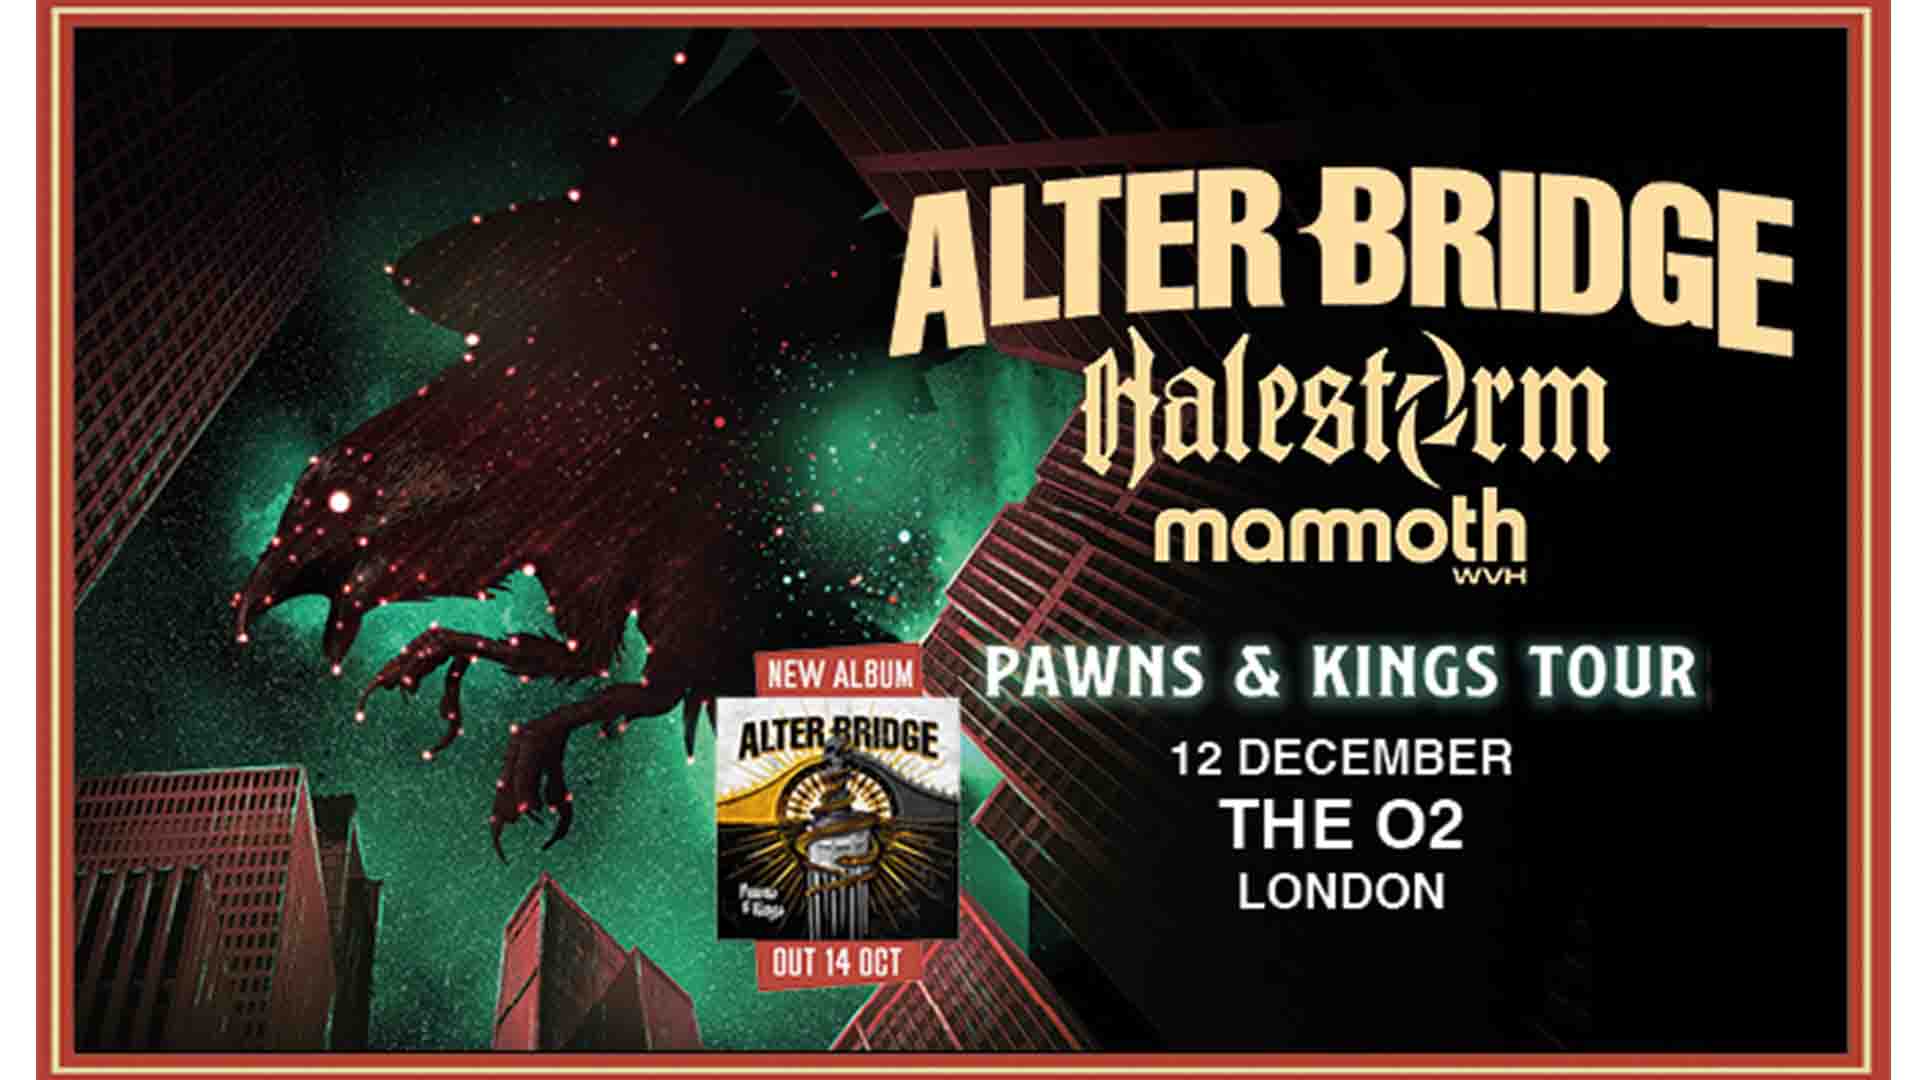 Alter Bridge's 'Pawns & Kings' Album Is Out Now!